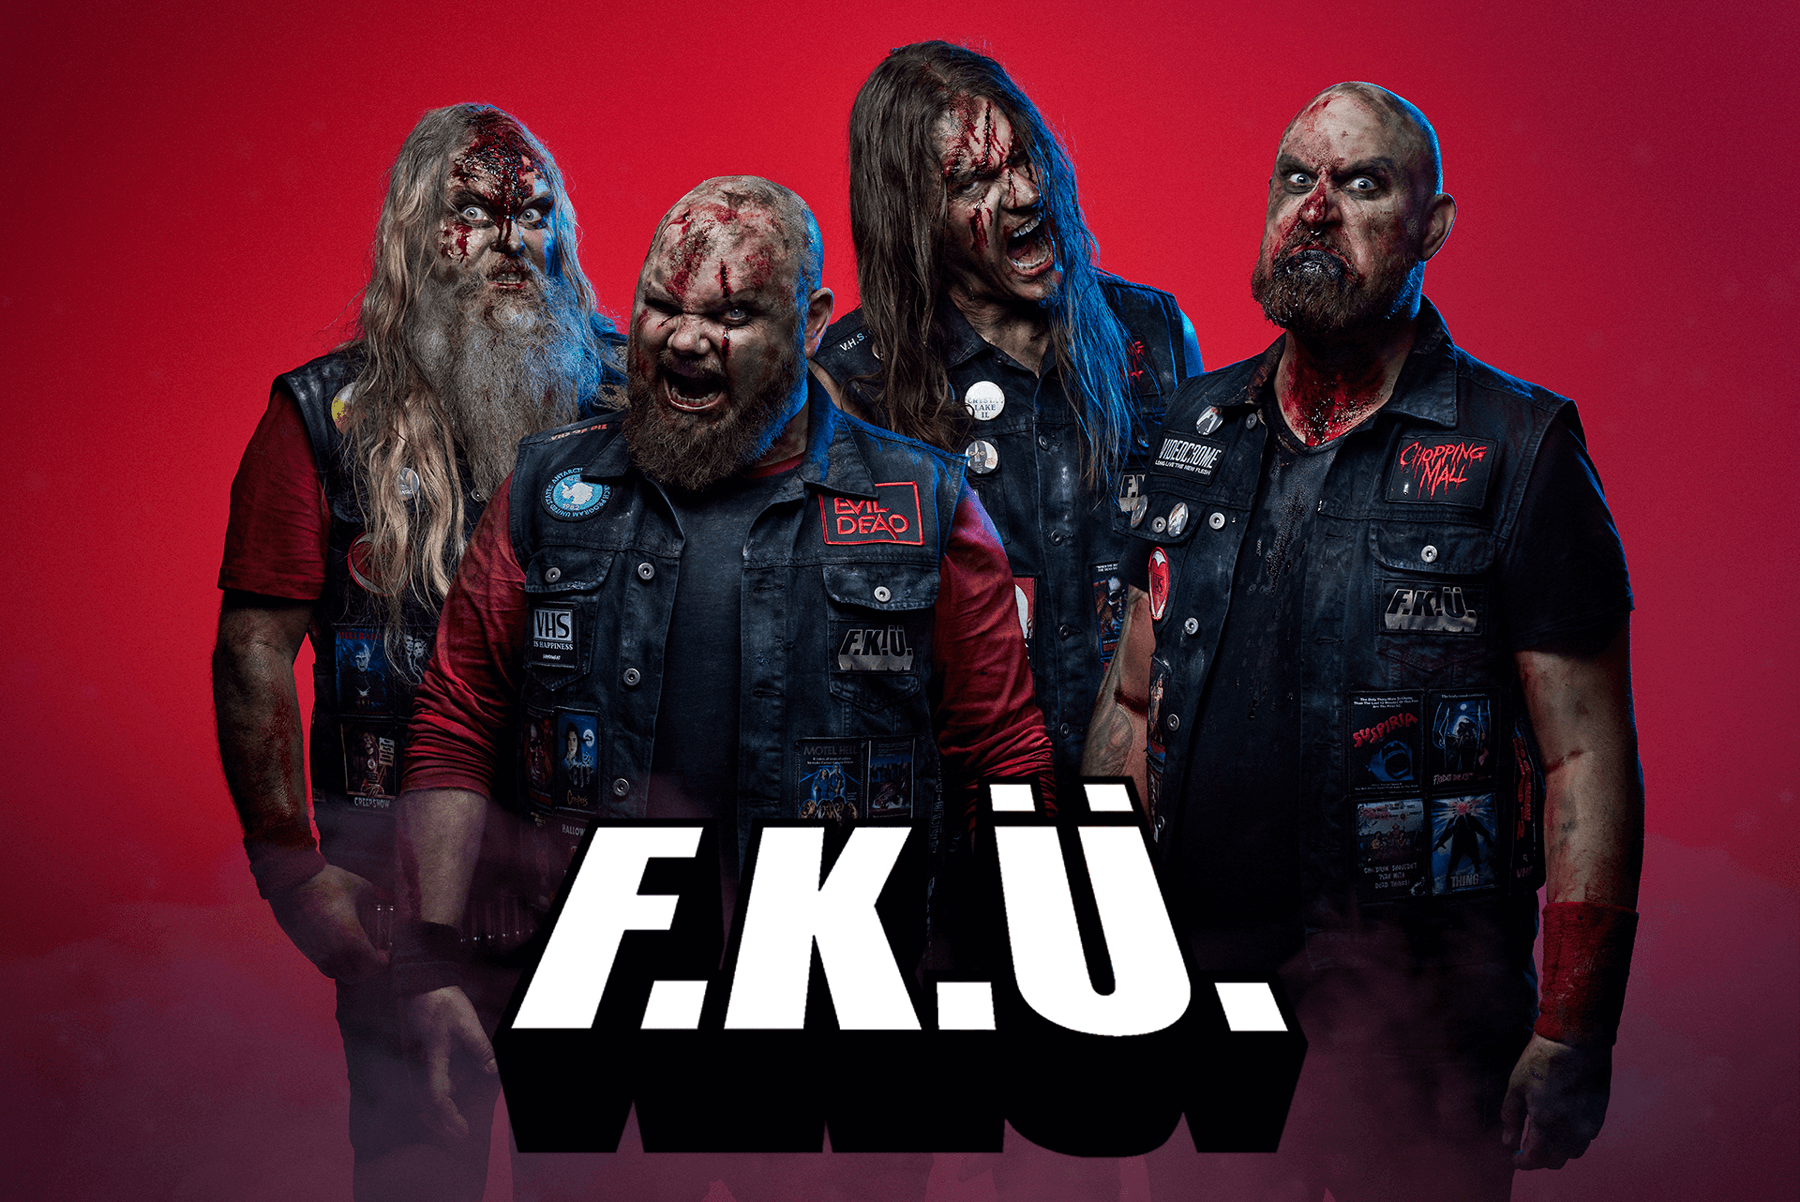 Interview with Larry Lethal from F.K.U.